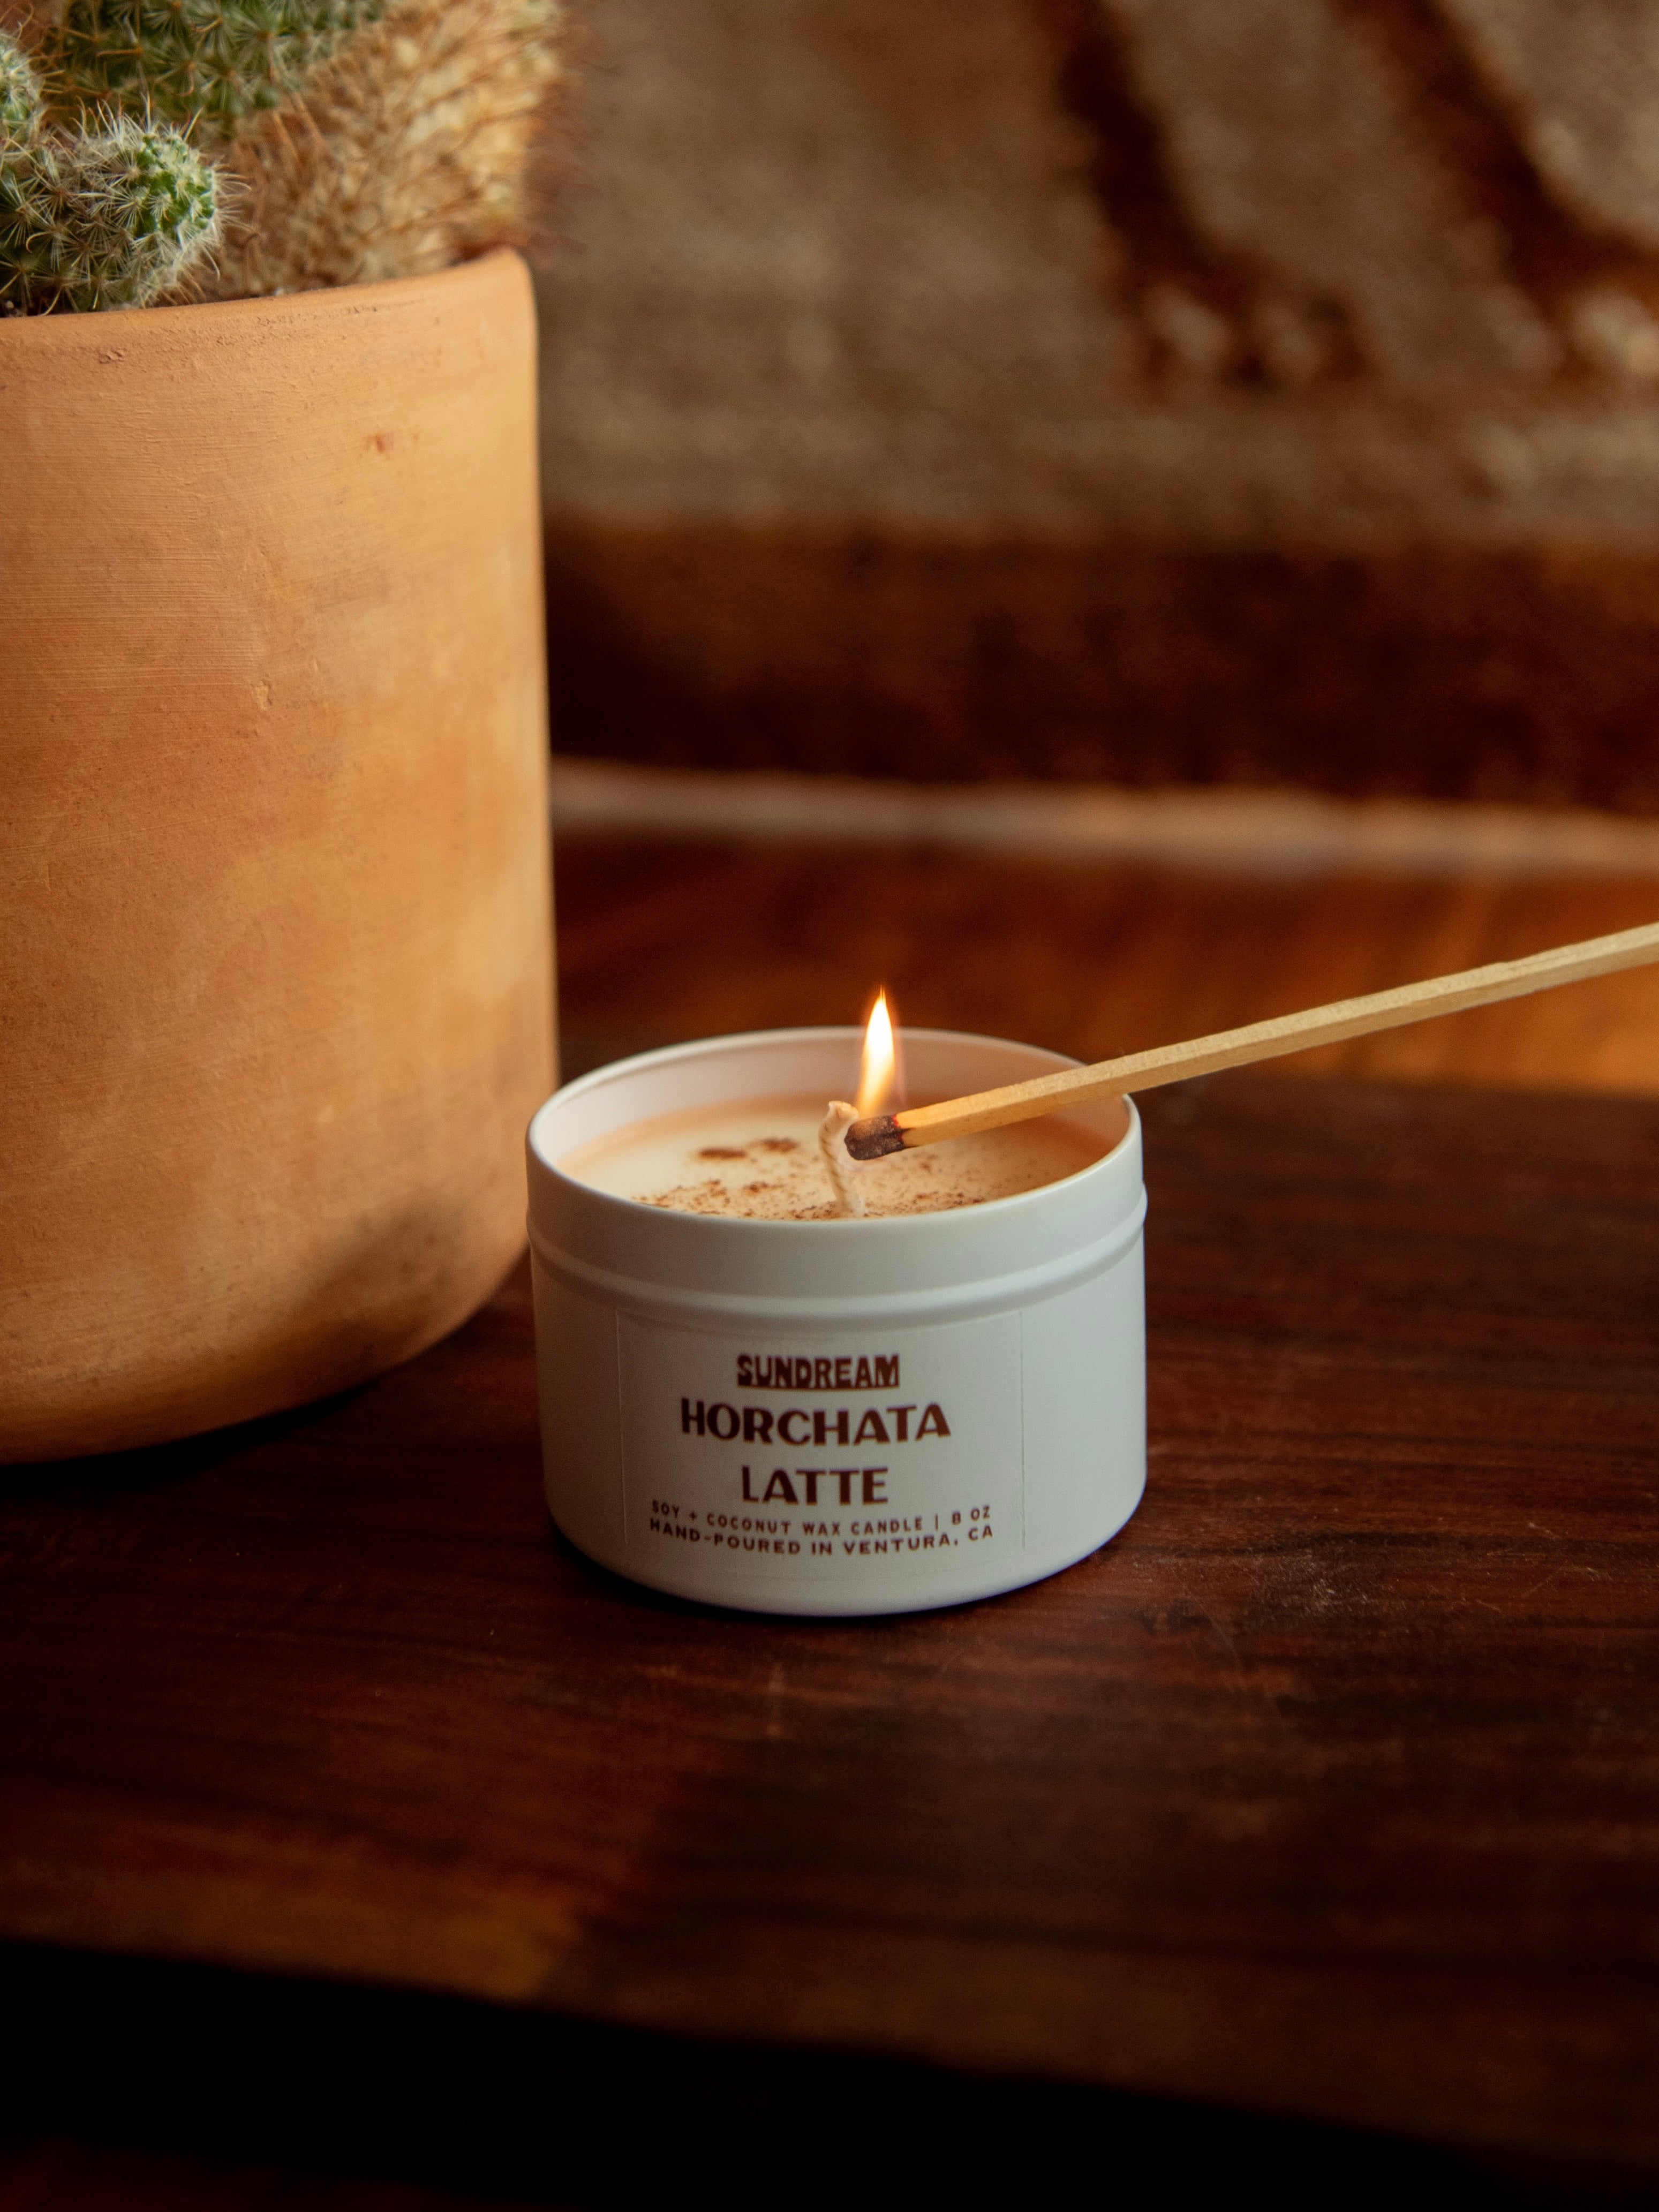 Hand-Poured Coconut Wax Candle